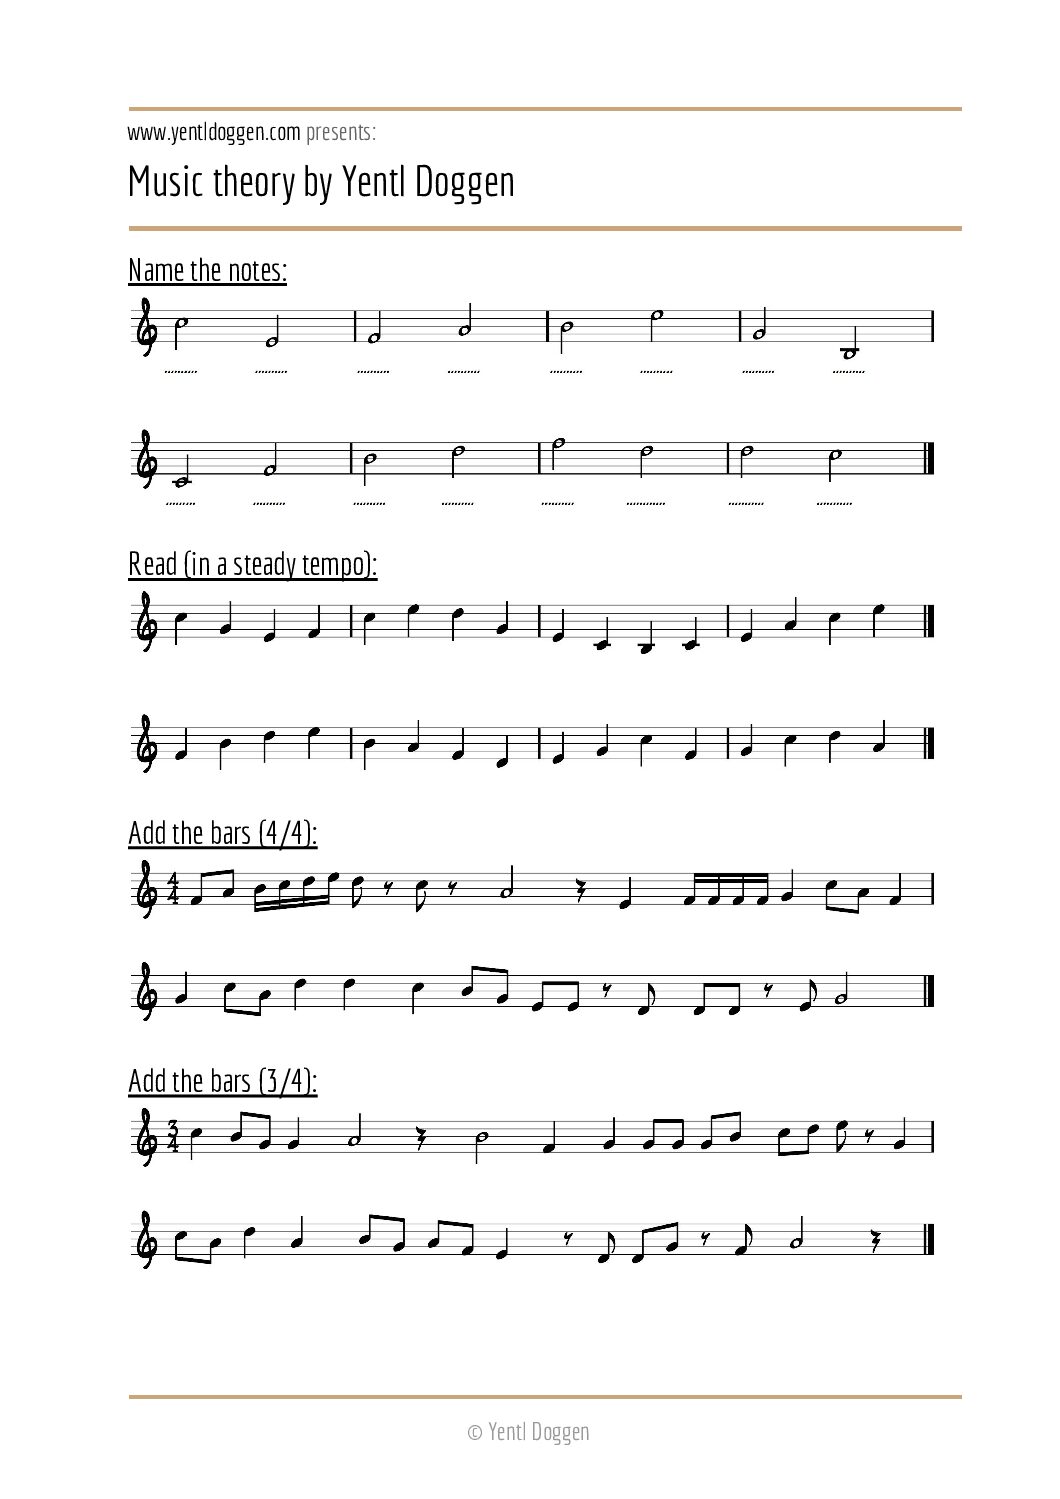 Music Theory Exercises for Beginners (PDF)